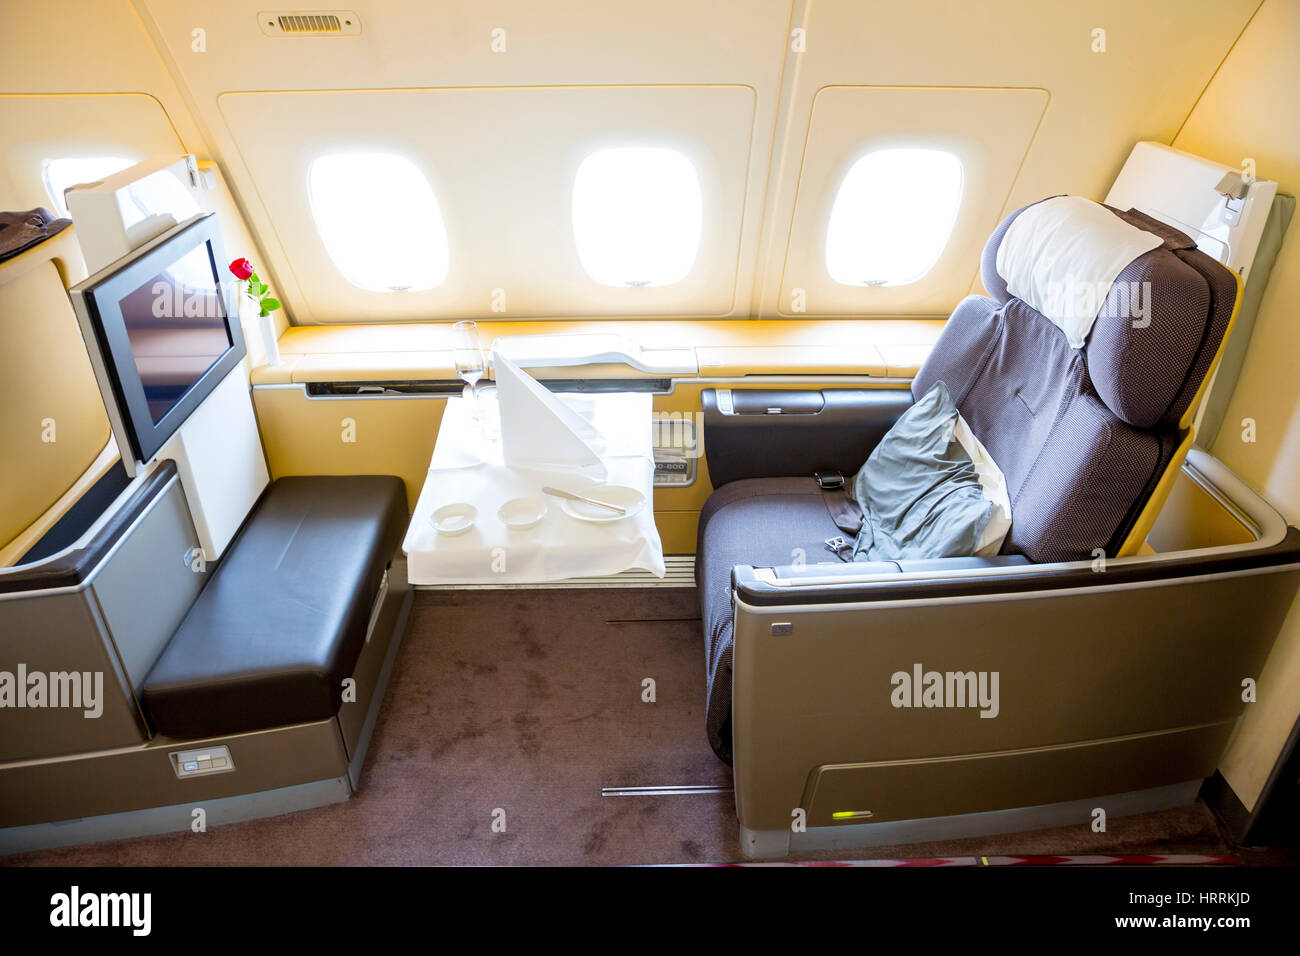 Sofia, Bulgaria - October 16, 2016: The inside of Lufthansa Airbus A380 airplane. The Airbus A380 is a double-deck, wide-body, four-engine jet airline Stock Photo